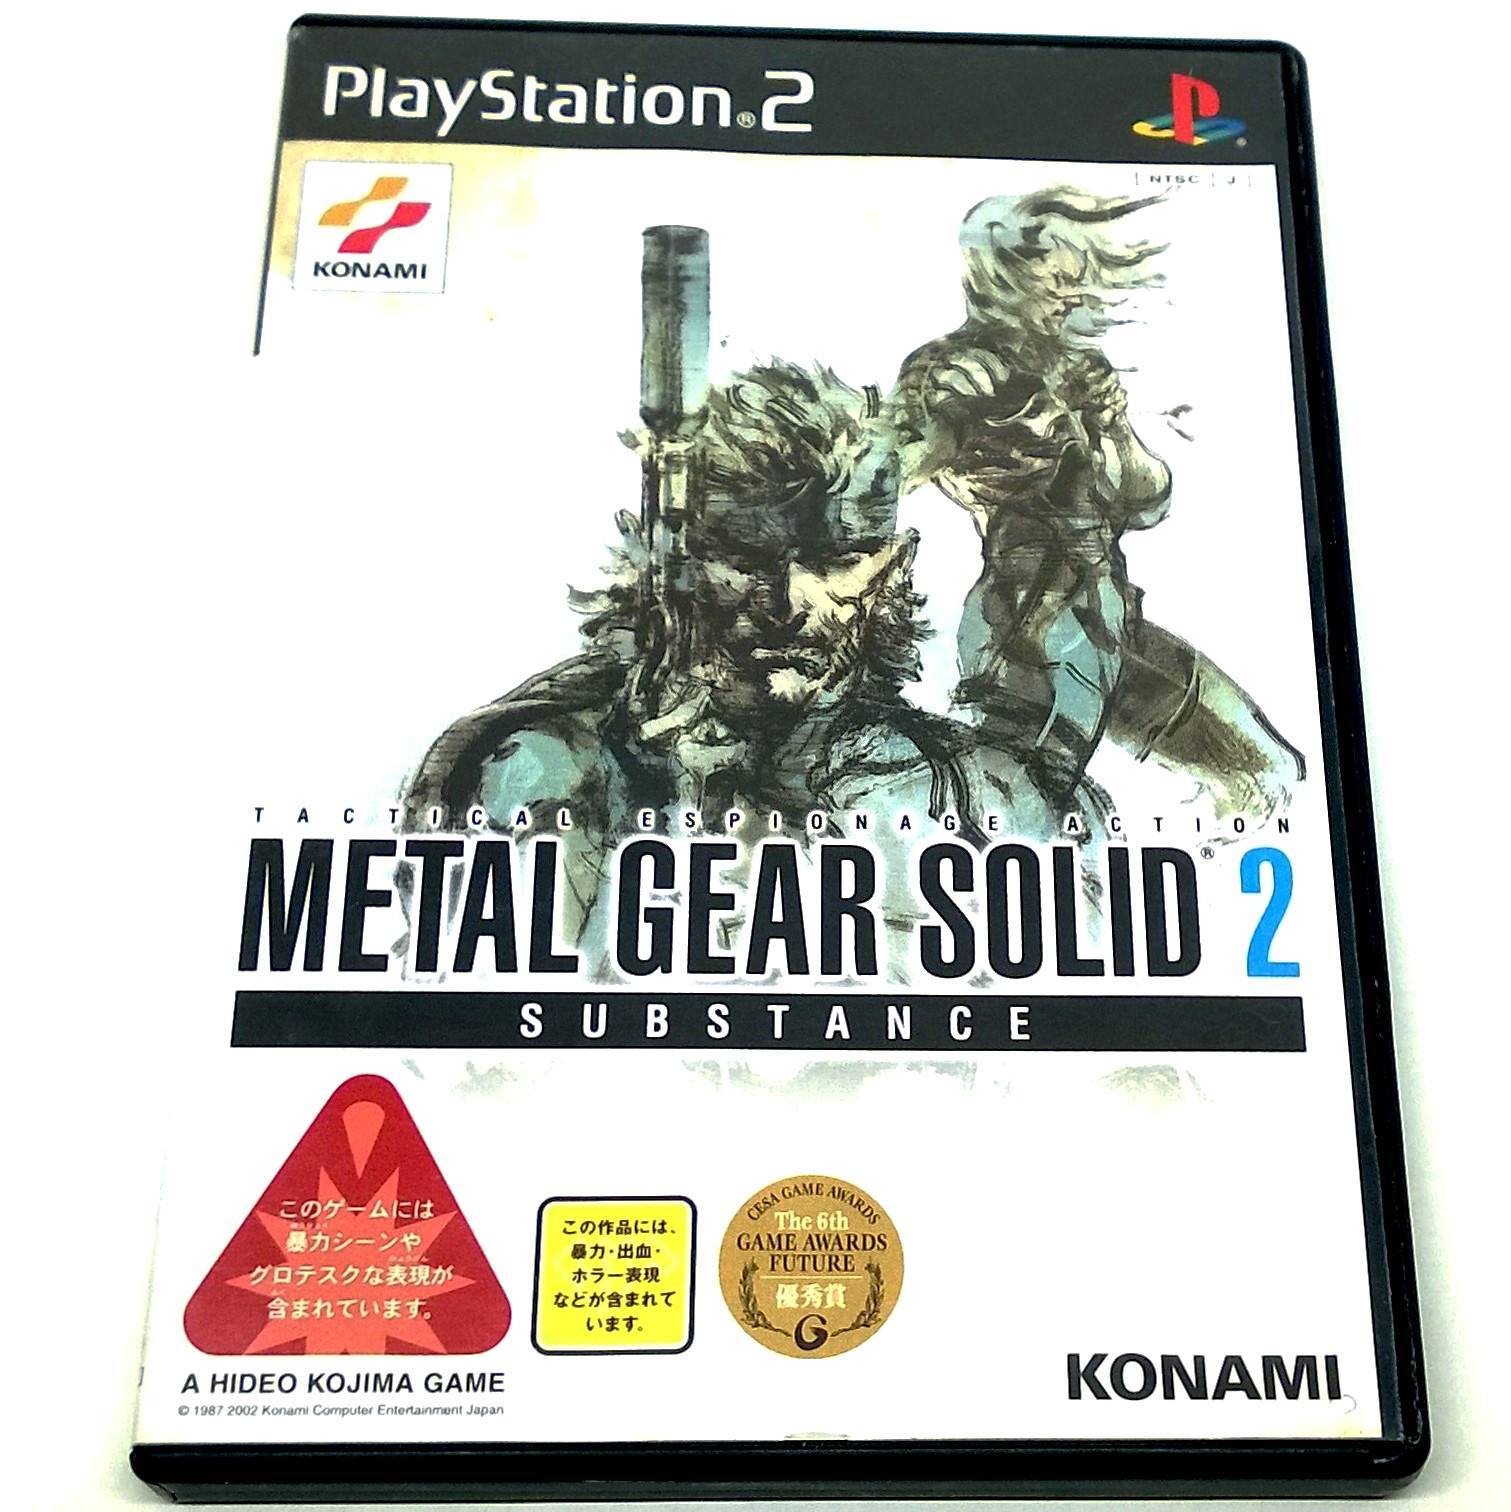 Metal Gear Solid 2: Substance for PlayStation 2 (import) - Front of case